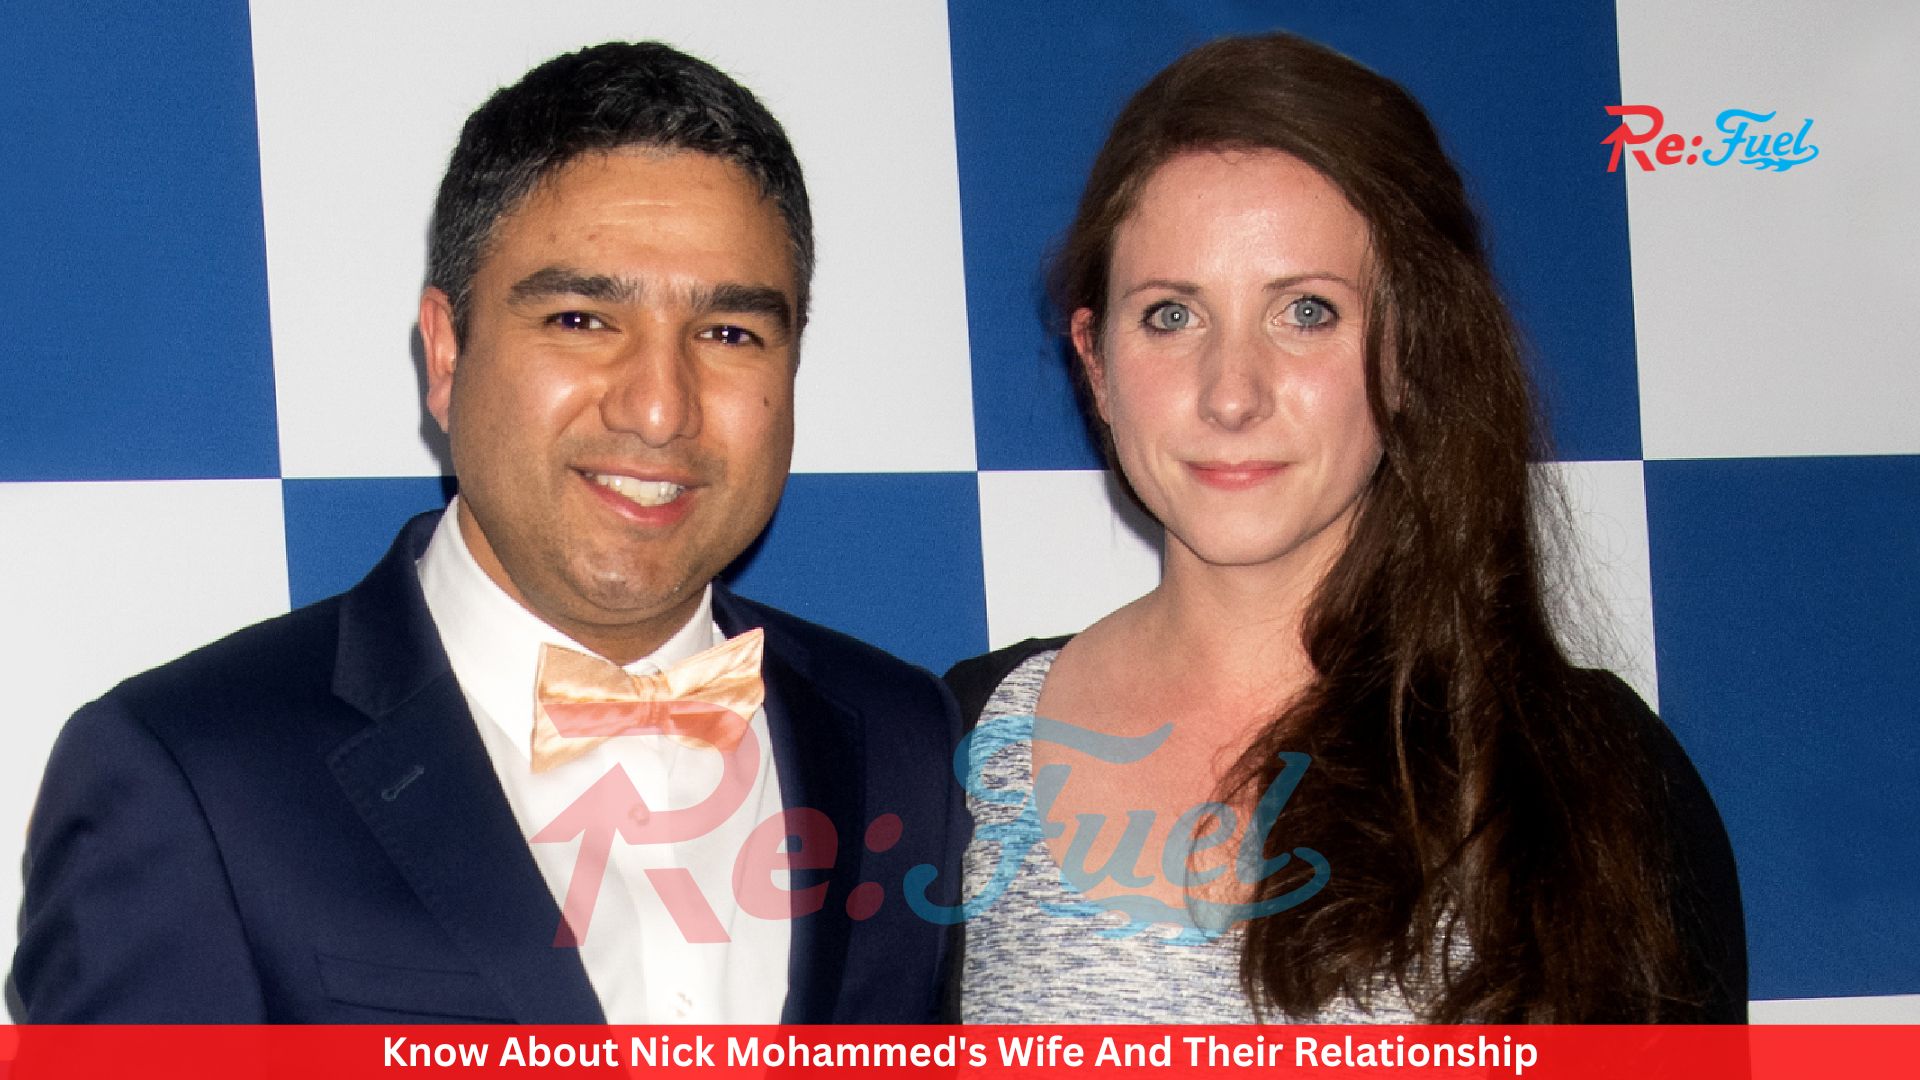 Know About Nick Mohammed's Wife And Their Relationship